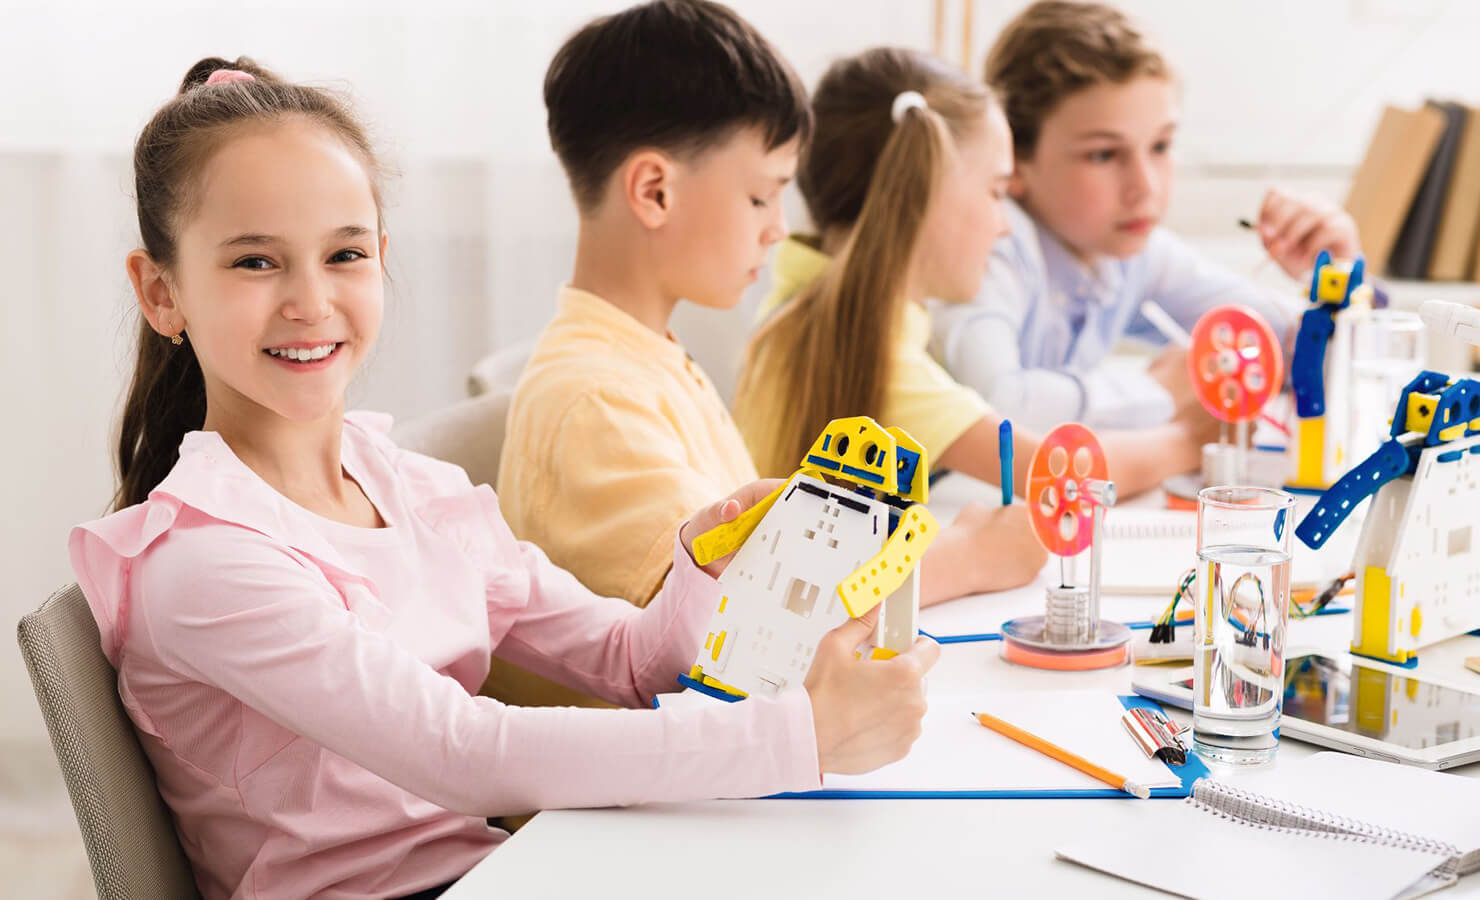 Benefits of STEM and STEAM learning